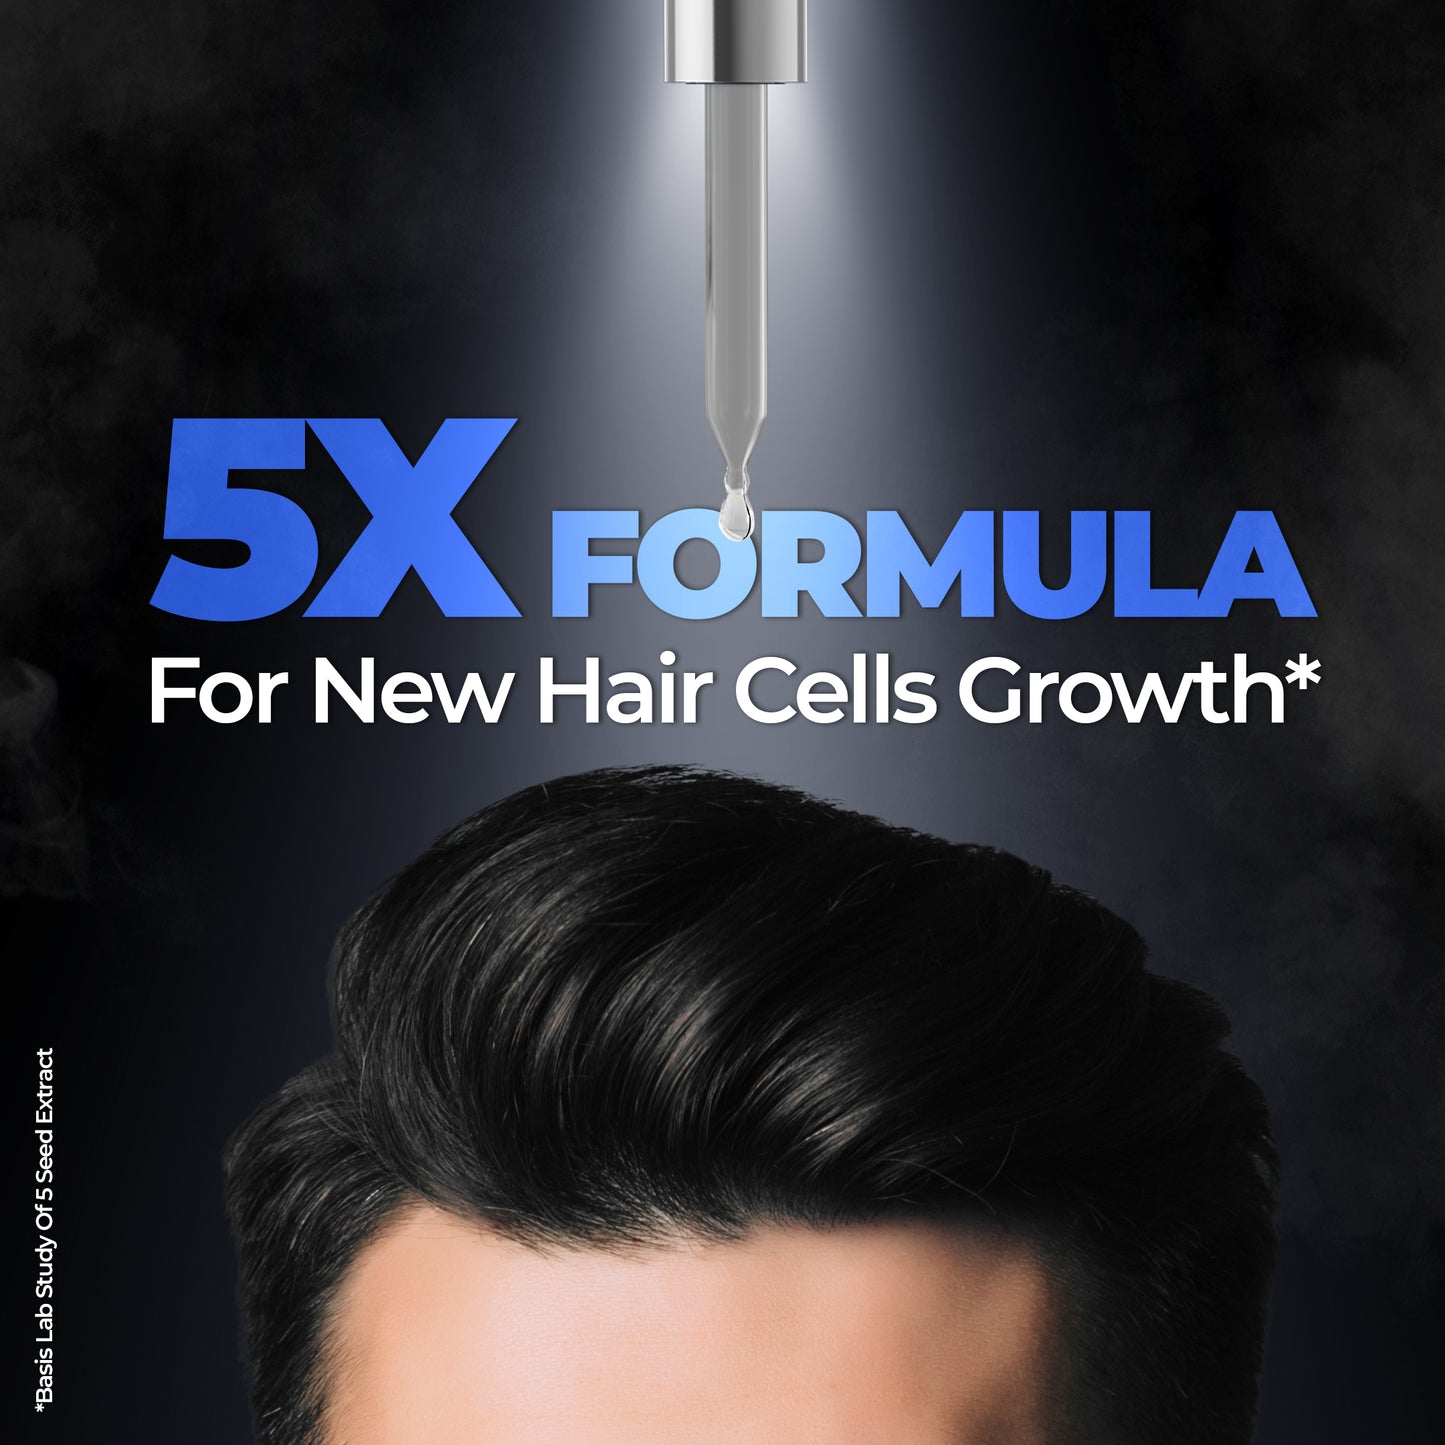 5X formula for new hair cells growth